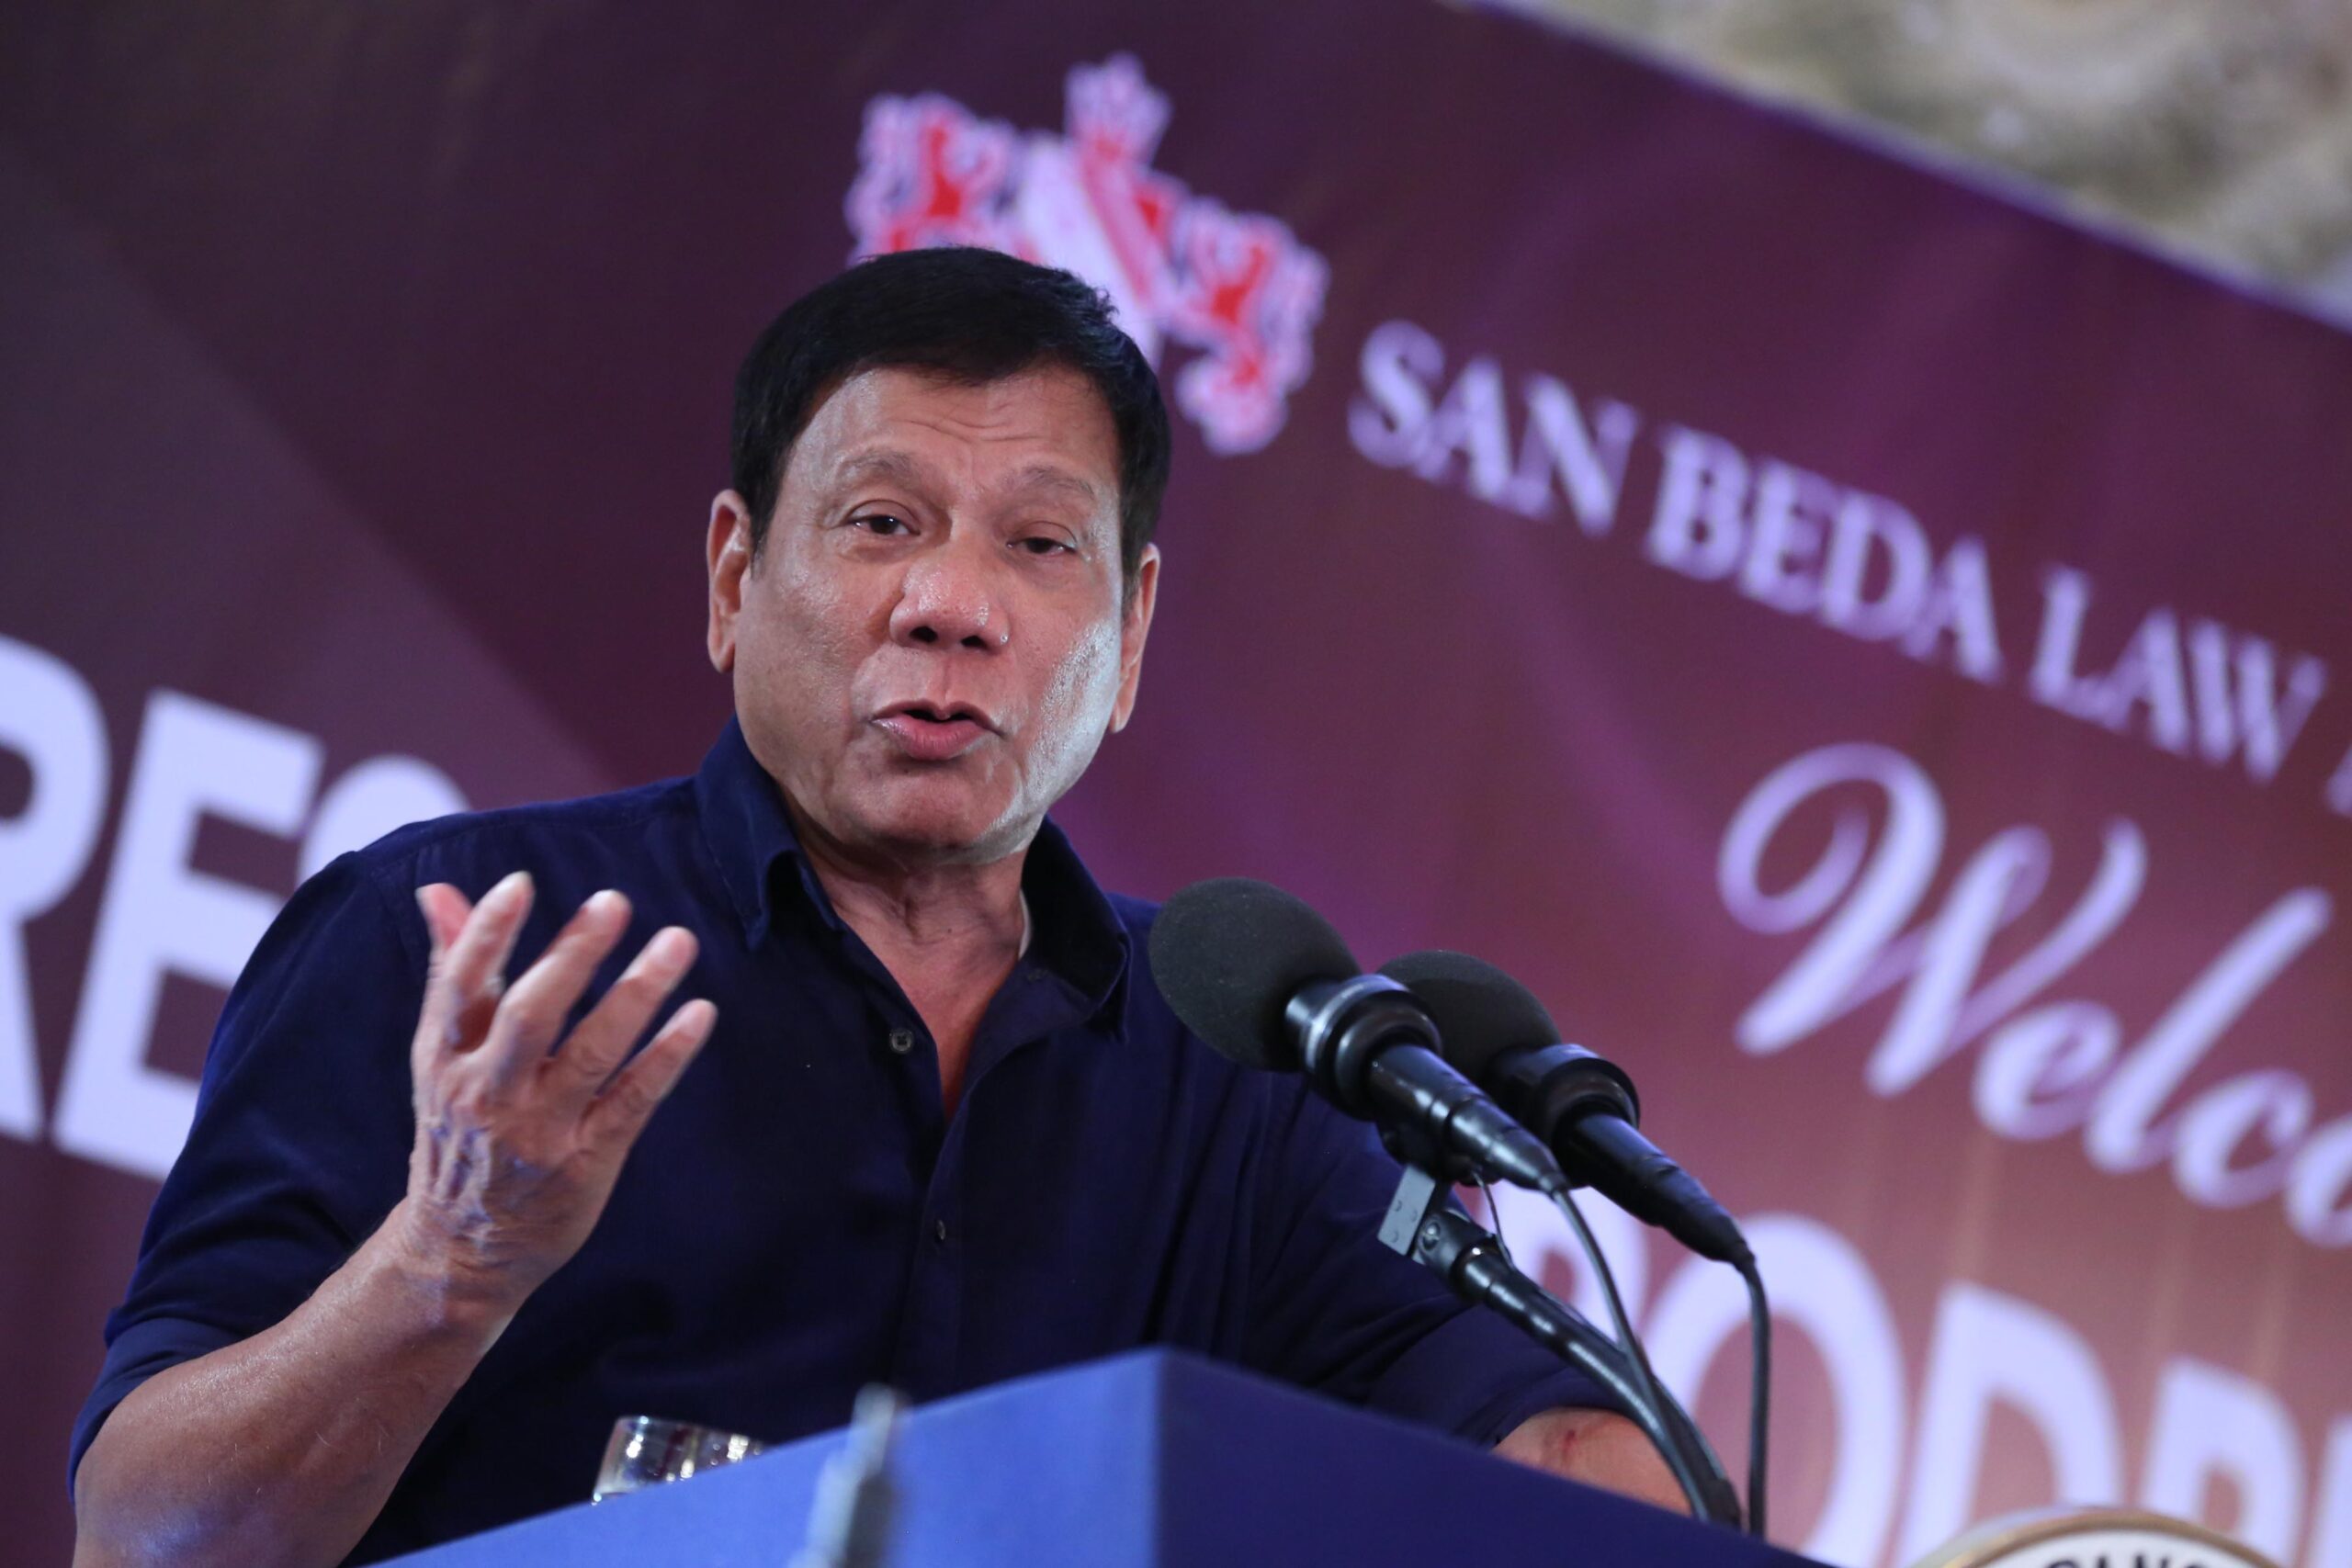 Duterte to companies: Stop contractualization or I will close you